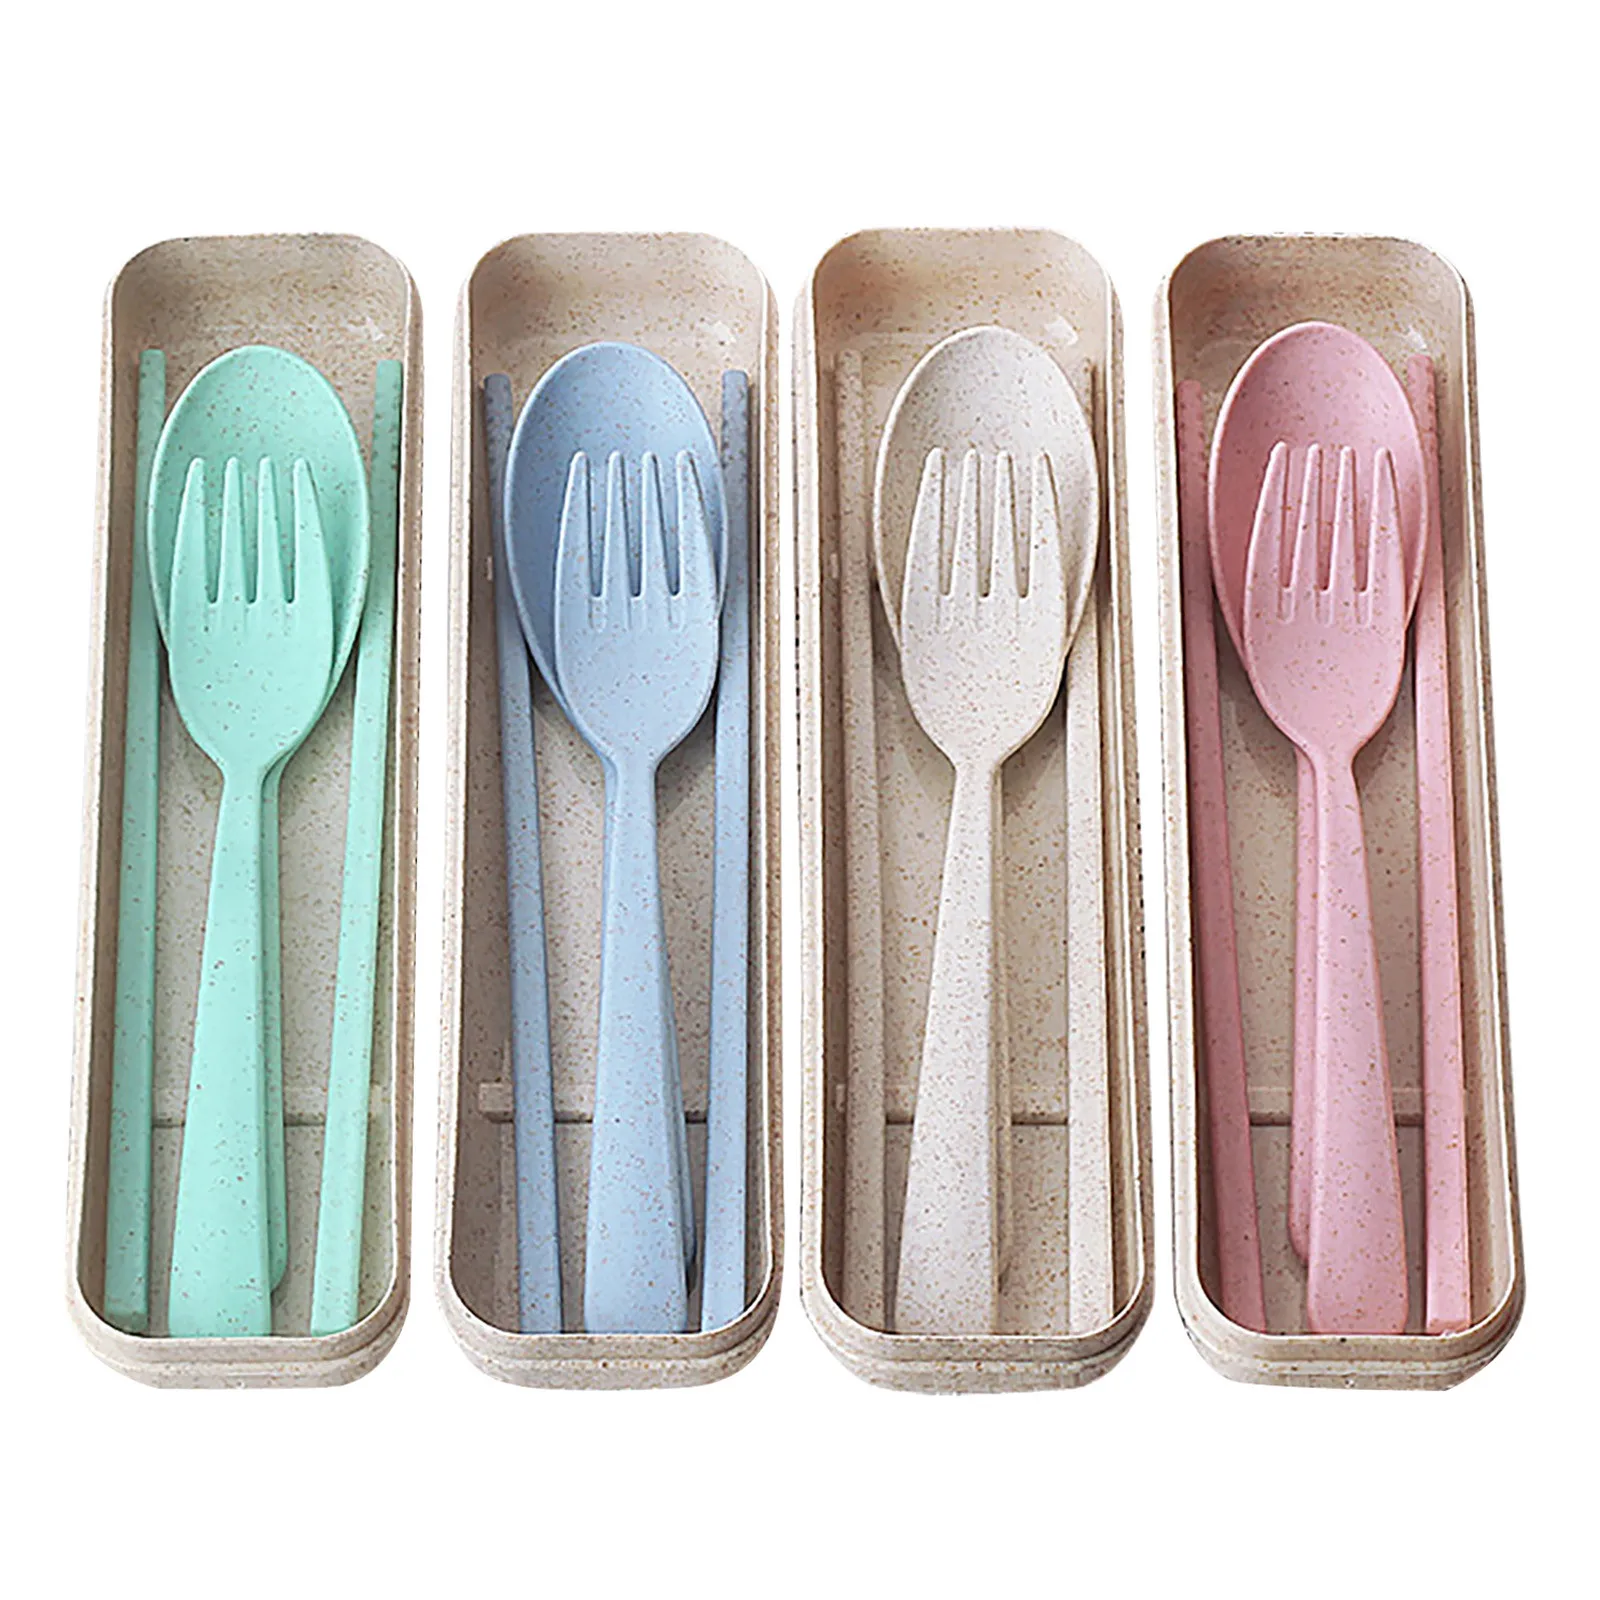 Chopstick Spoon Fork Set Dinnerware Travel Outdoor Picnic With Wheat Straw Boxes 